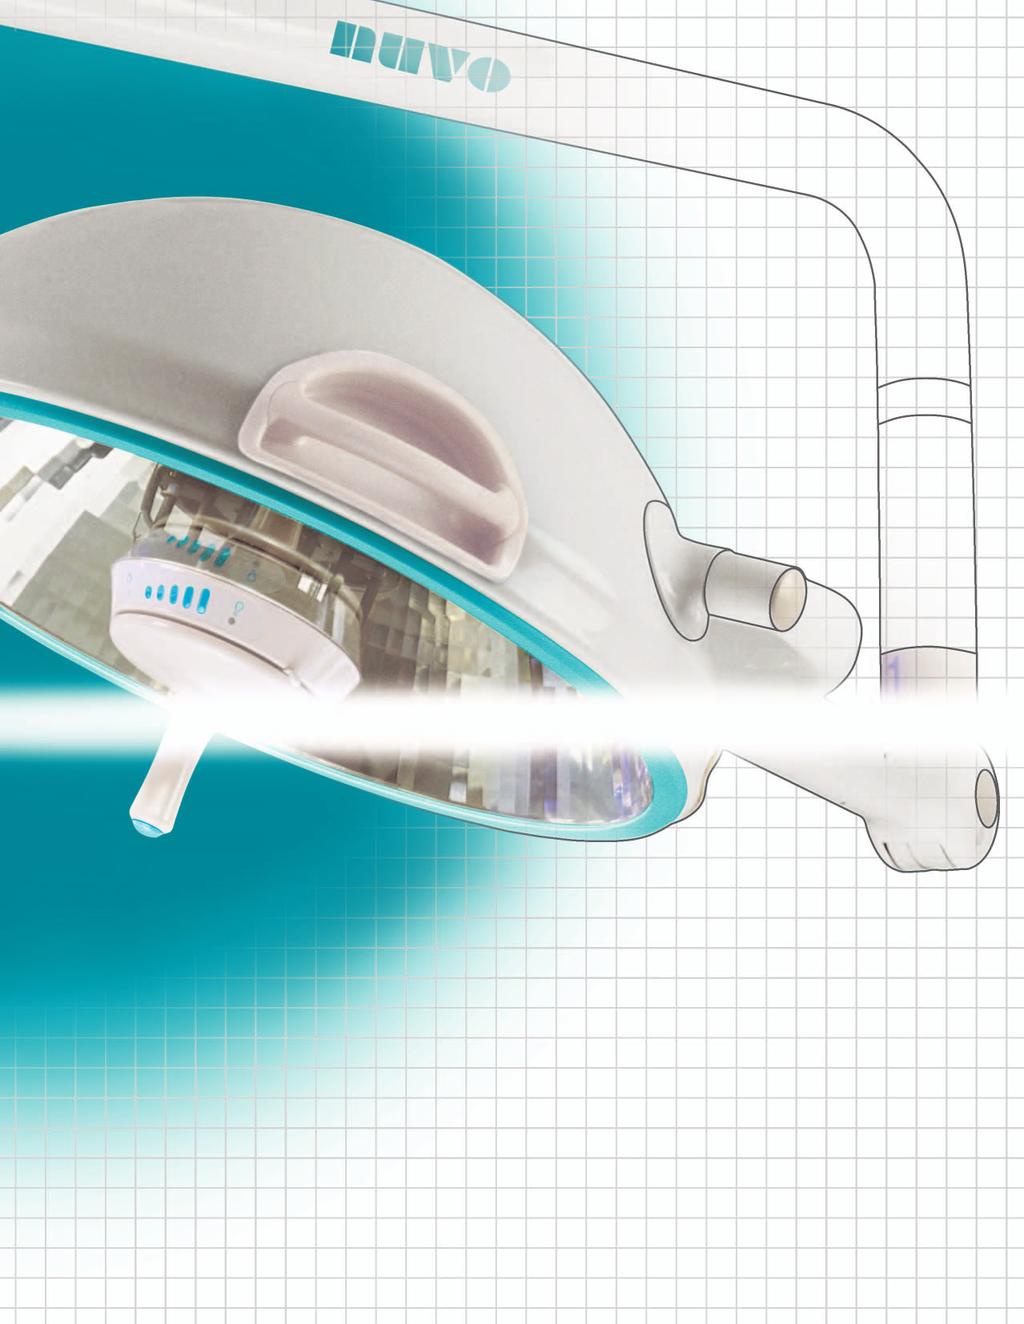 all joints of the NUVO surgical light are free to rotate continuously, without rigid stops, to provide maximum POSITIONING FLEXIBILITY.